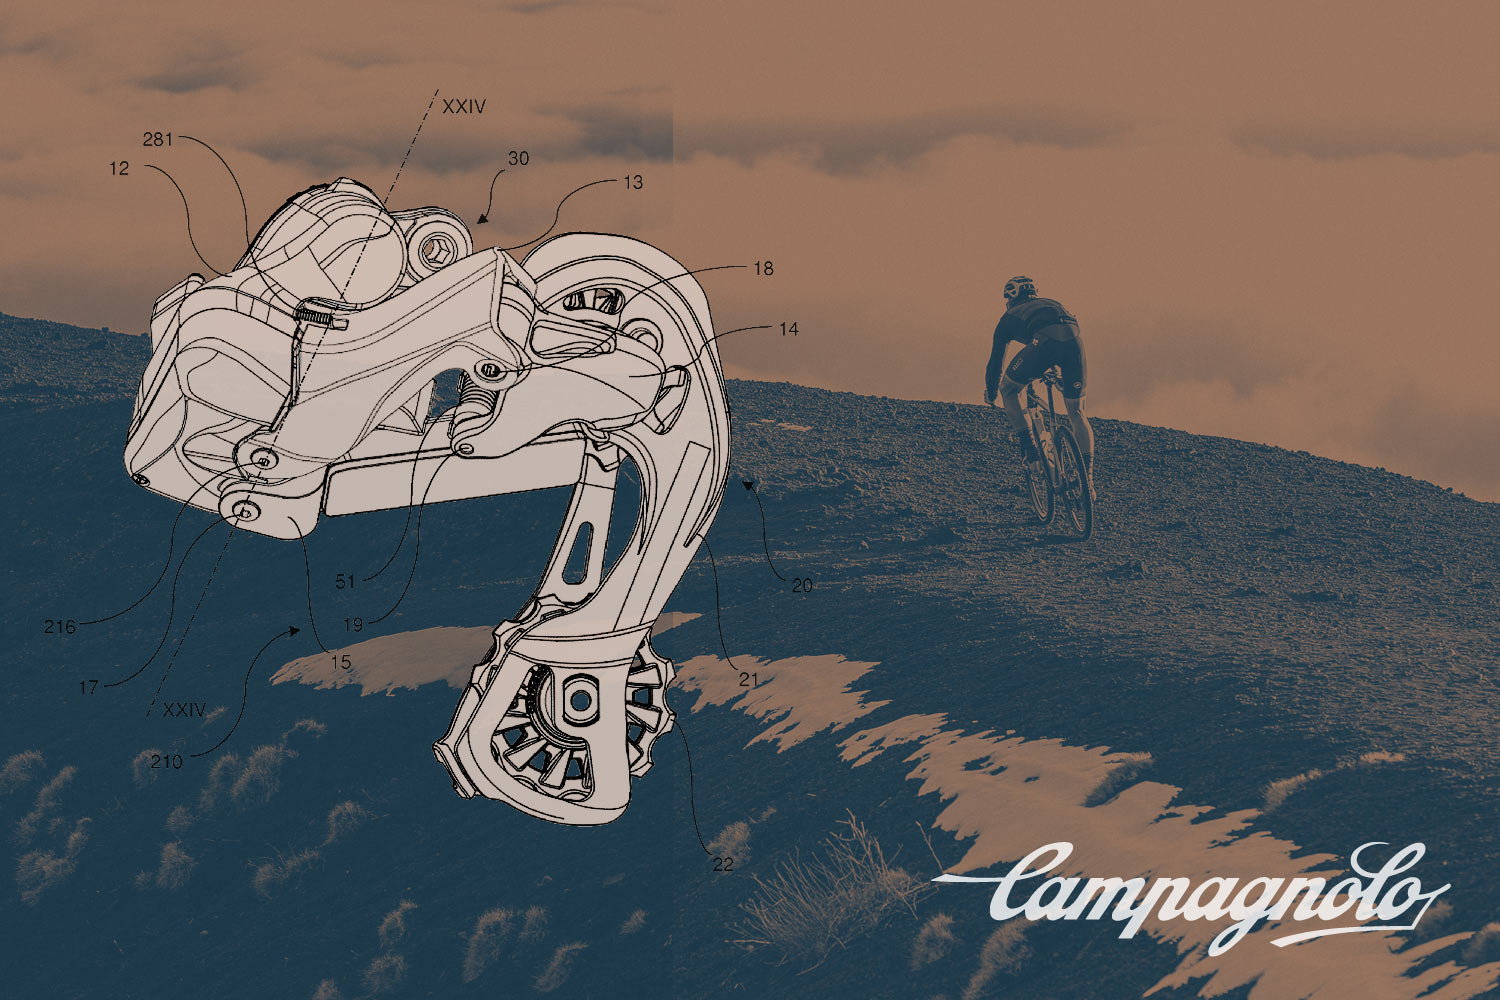 campagnolo font